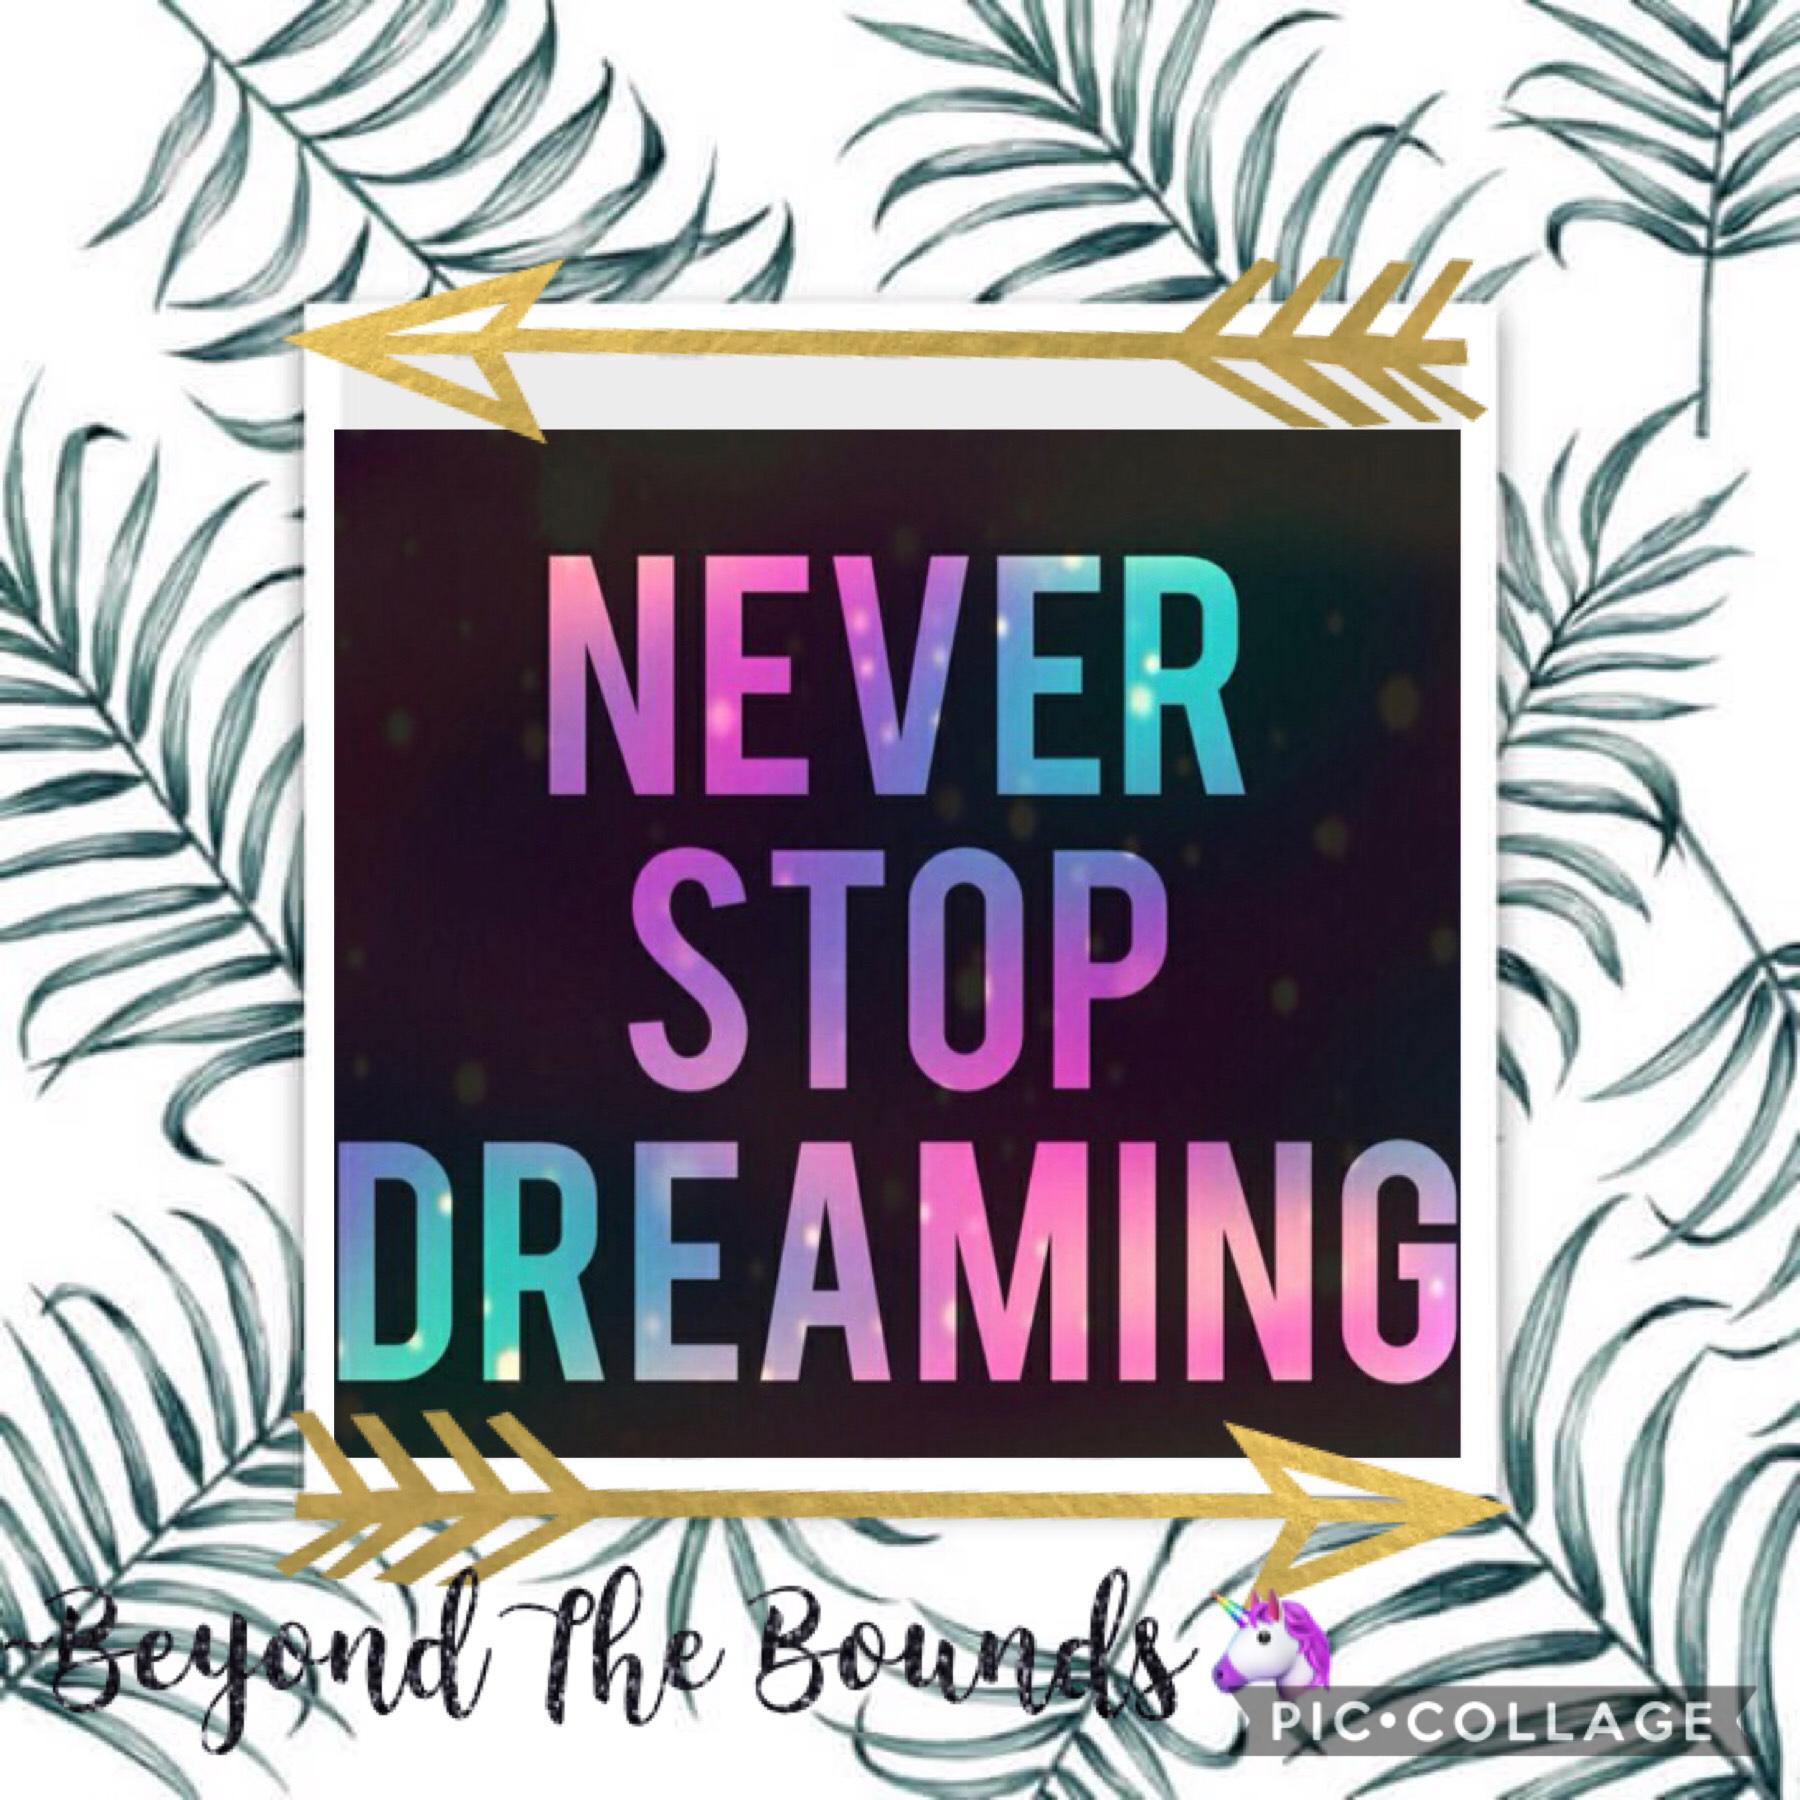 Never ever stop dreaming!✨
Do you like the collage? Let us know through the comments...
Lots of love,
Beyond The Bounds🦋